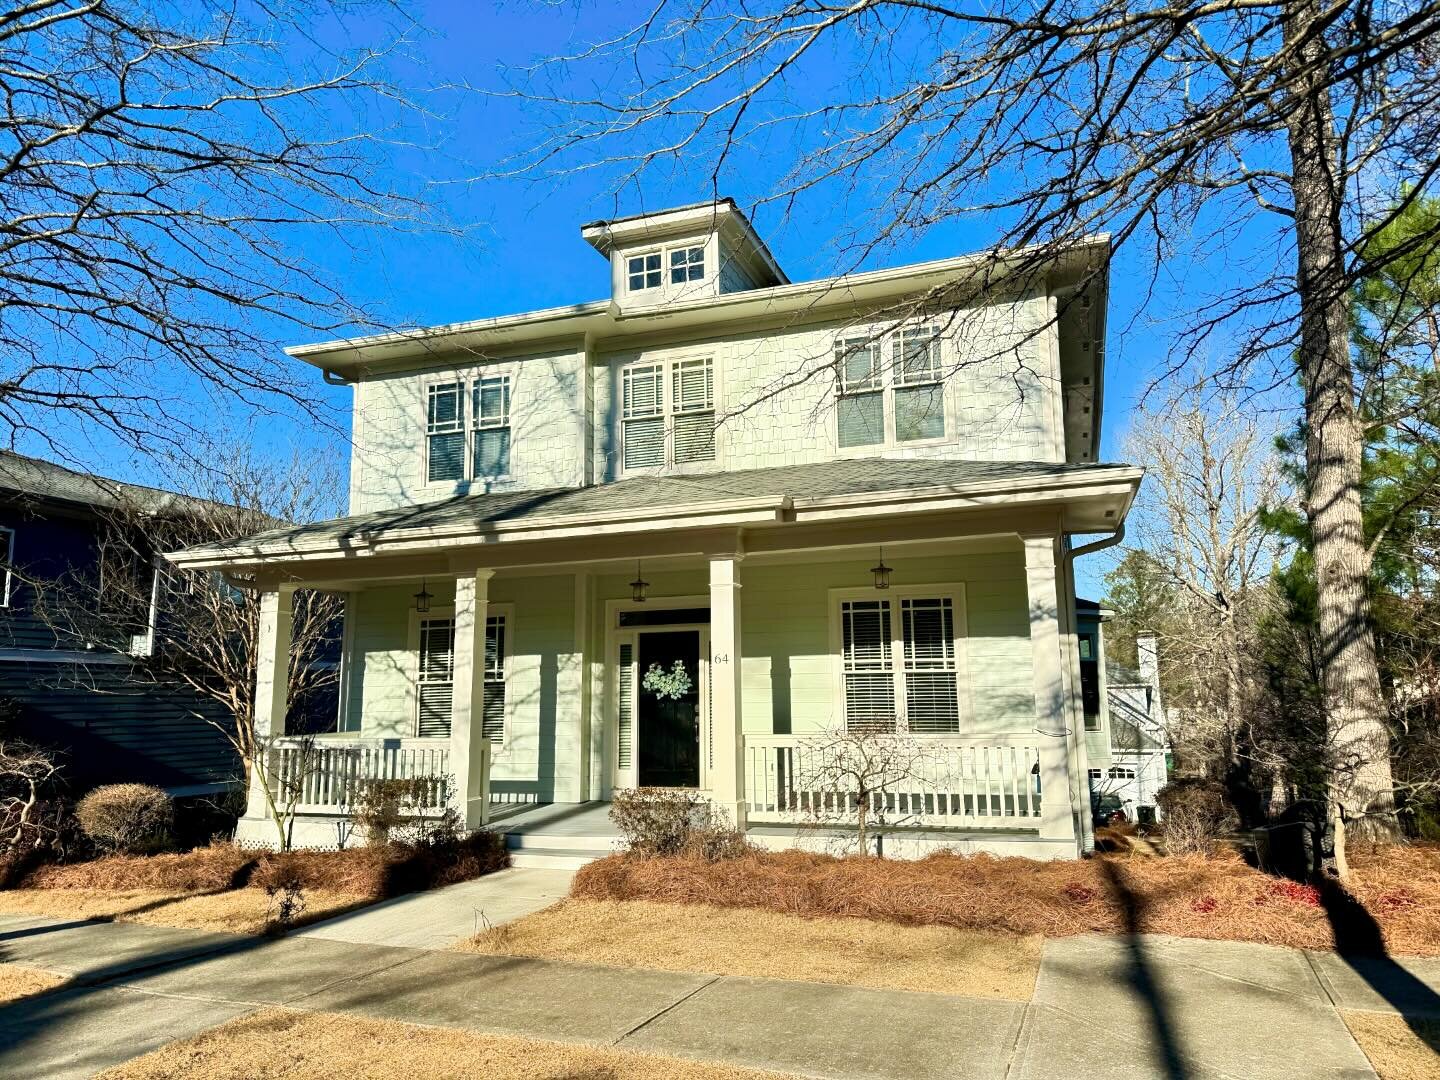 NEW LISTING! Check out this fantastic 4 bedroom 3 full/2 half bath home in Oak Grove! This home has beautiful hardwood floors throughout the main level, open kitchen, living and dining areas, nice sized bedrooms and a large screened porch for relaxin